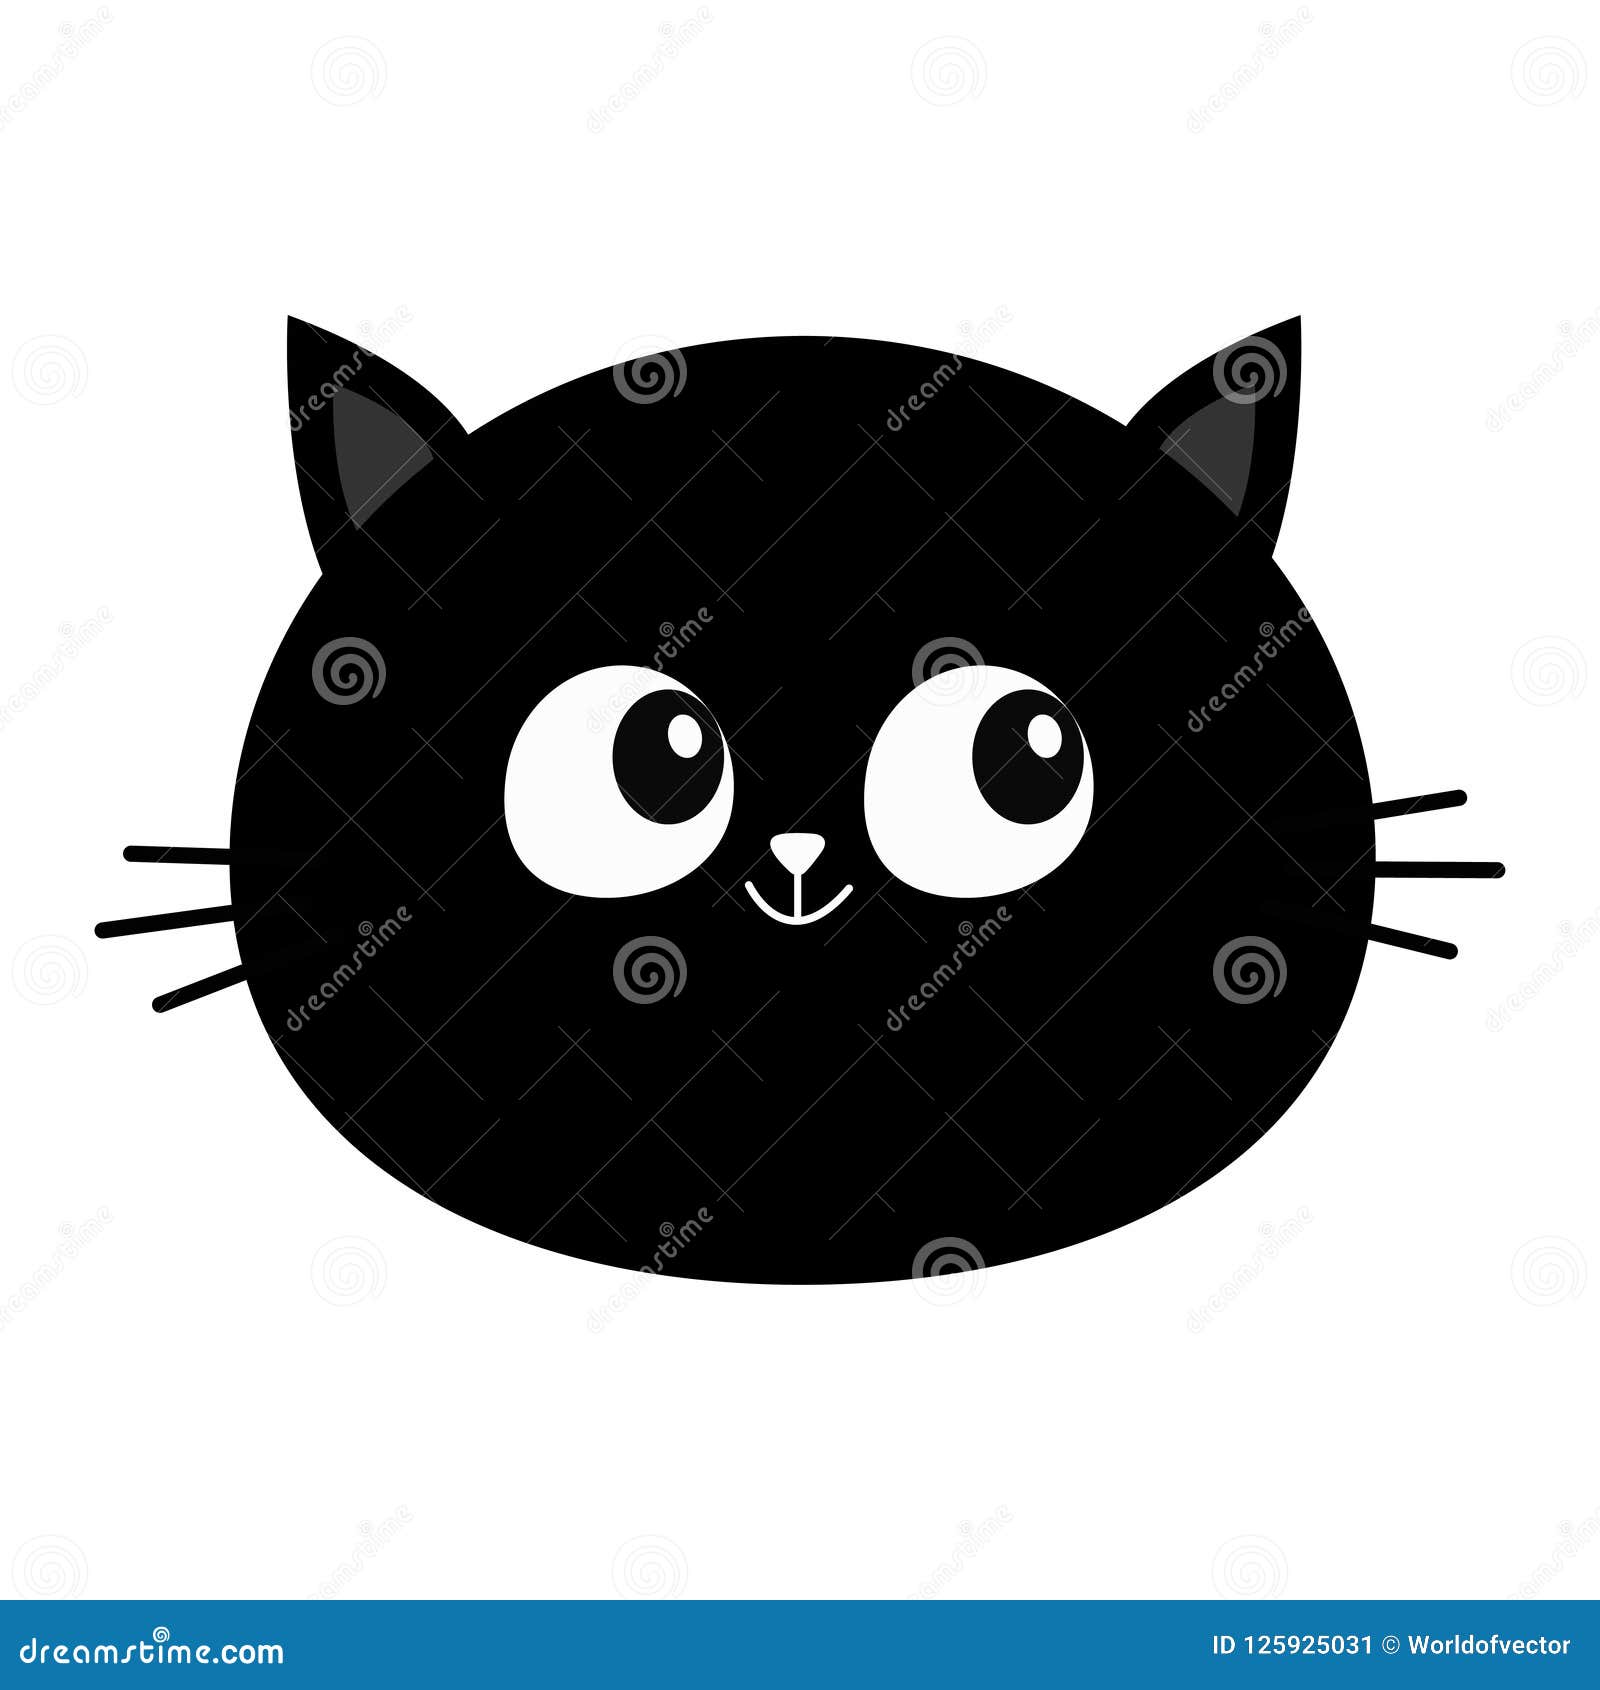 Cute cartoon cat face icon on white background Vector Image